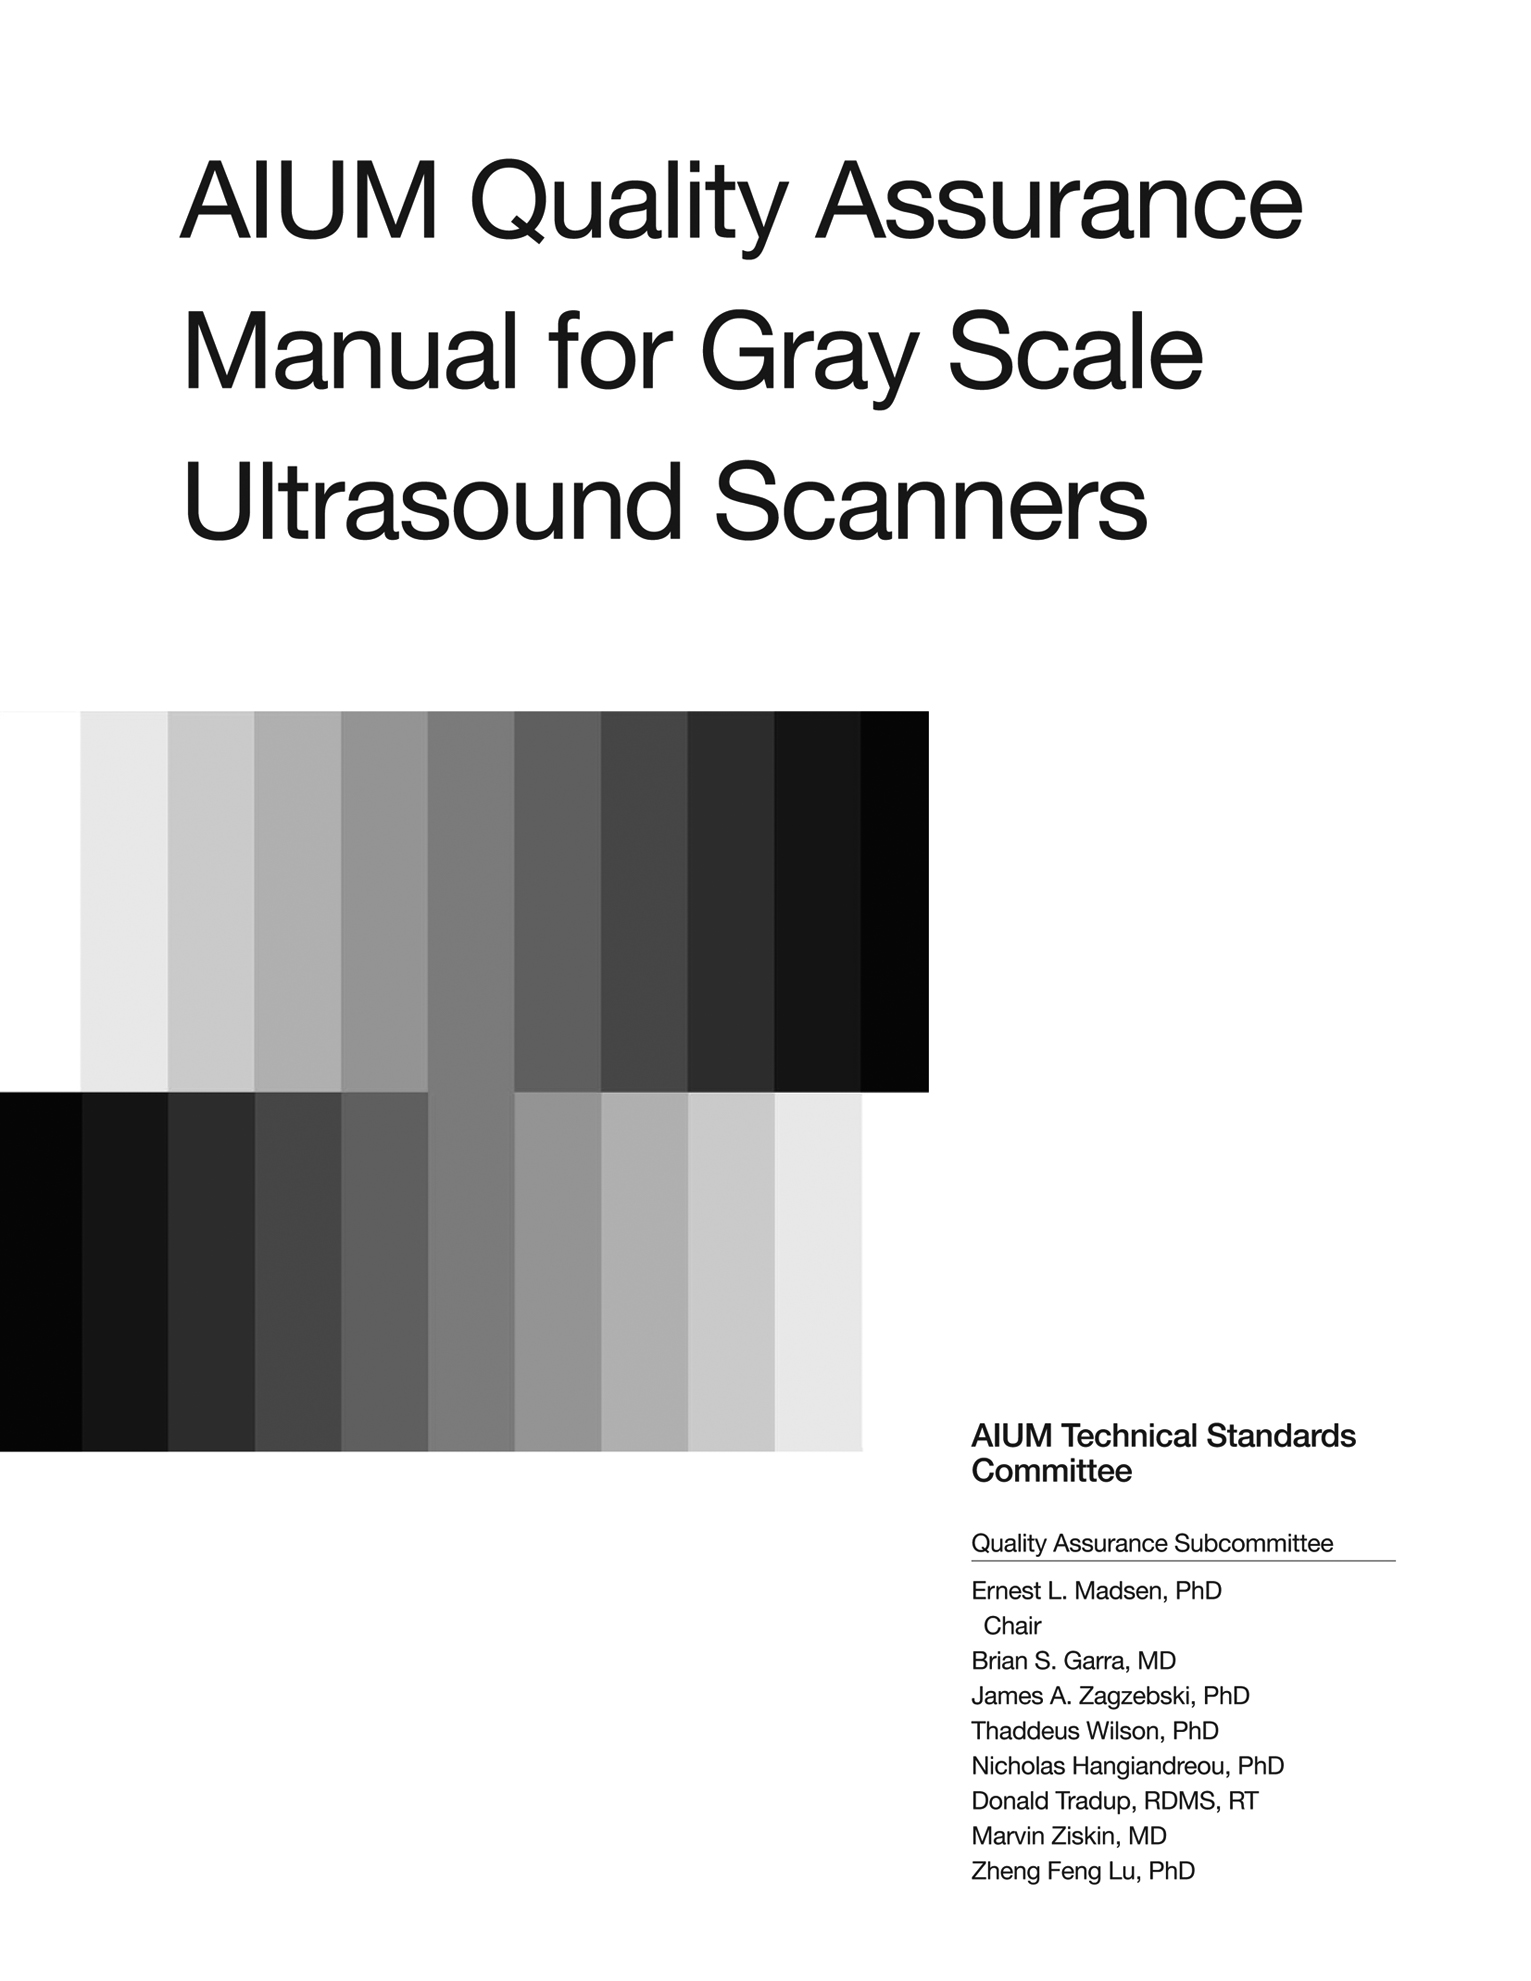 AIUM quality assurance manual for gray scale ultrasound scanners